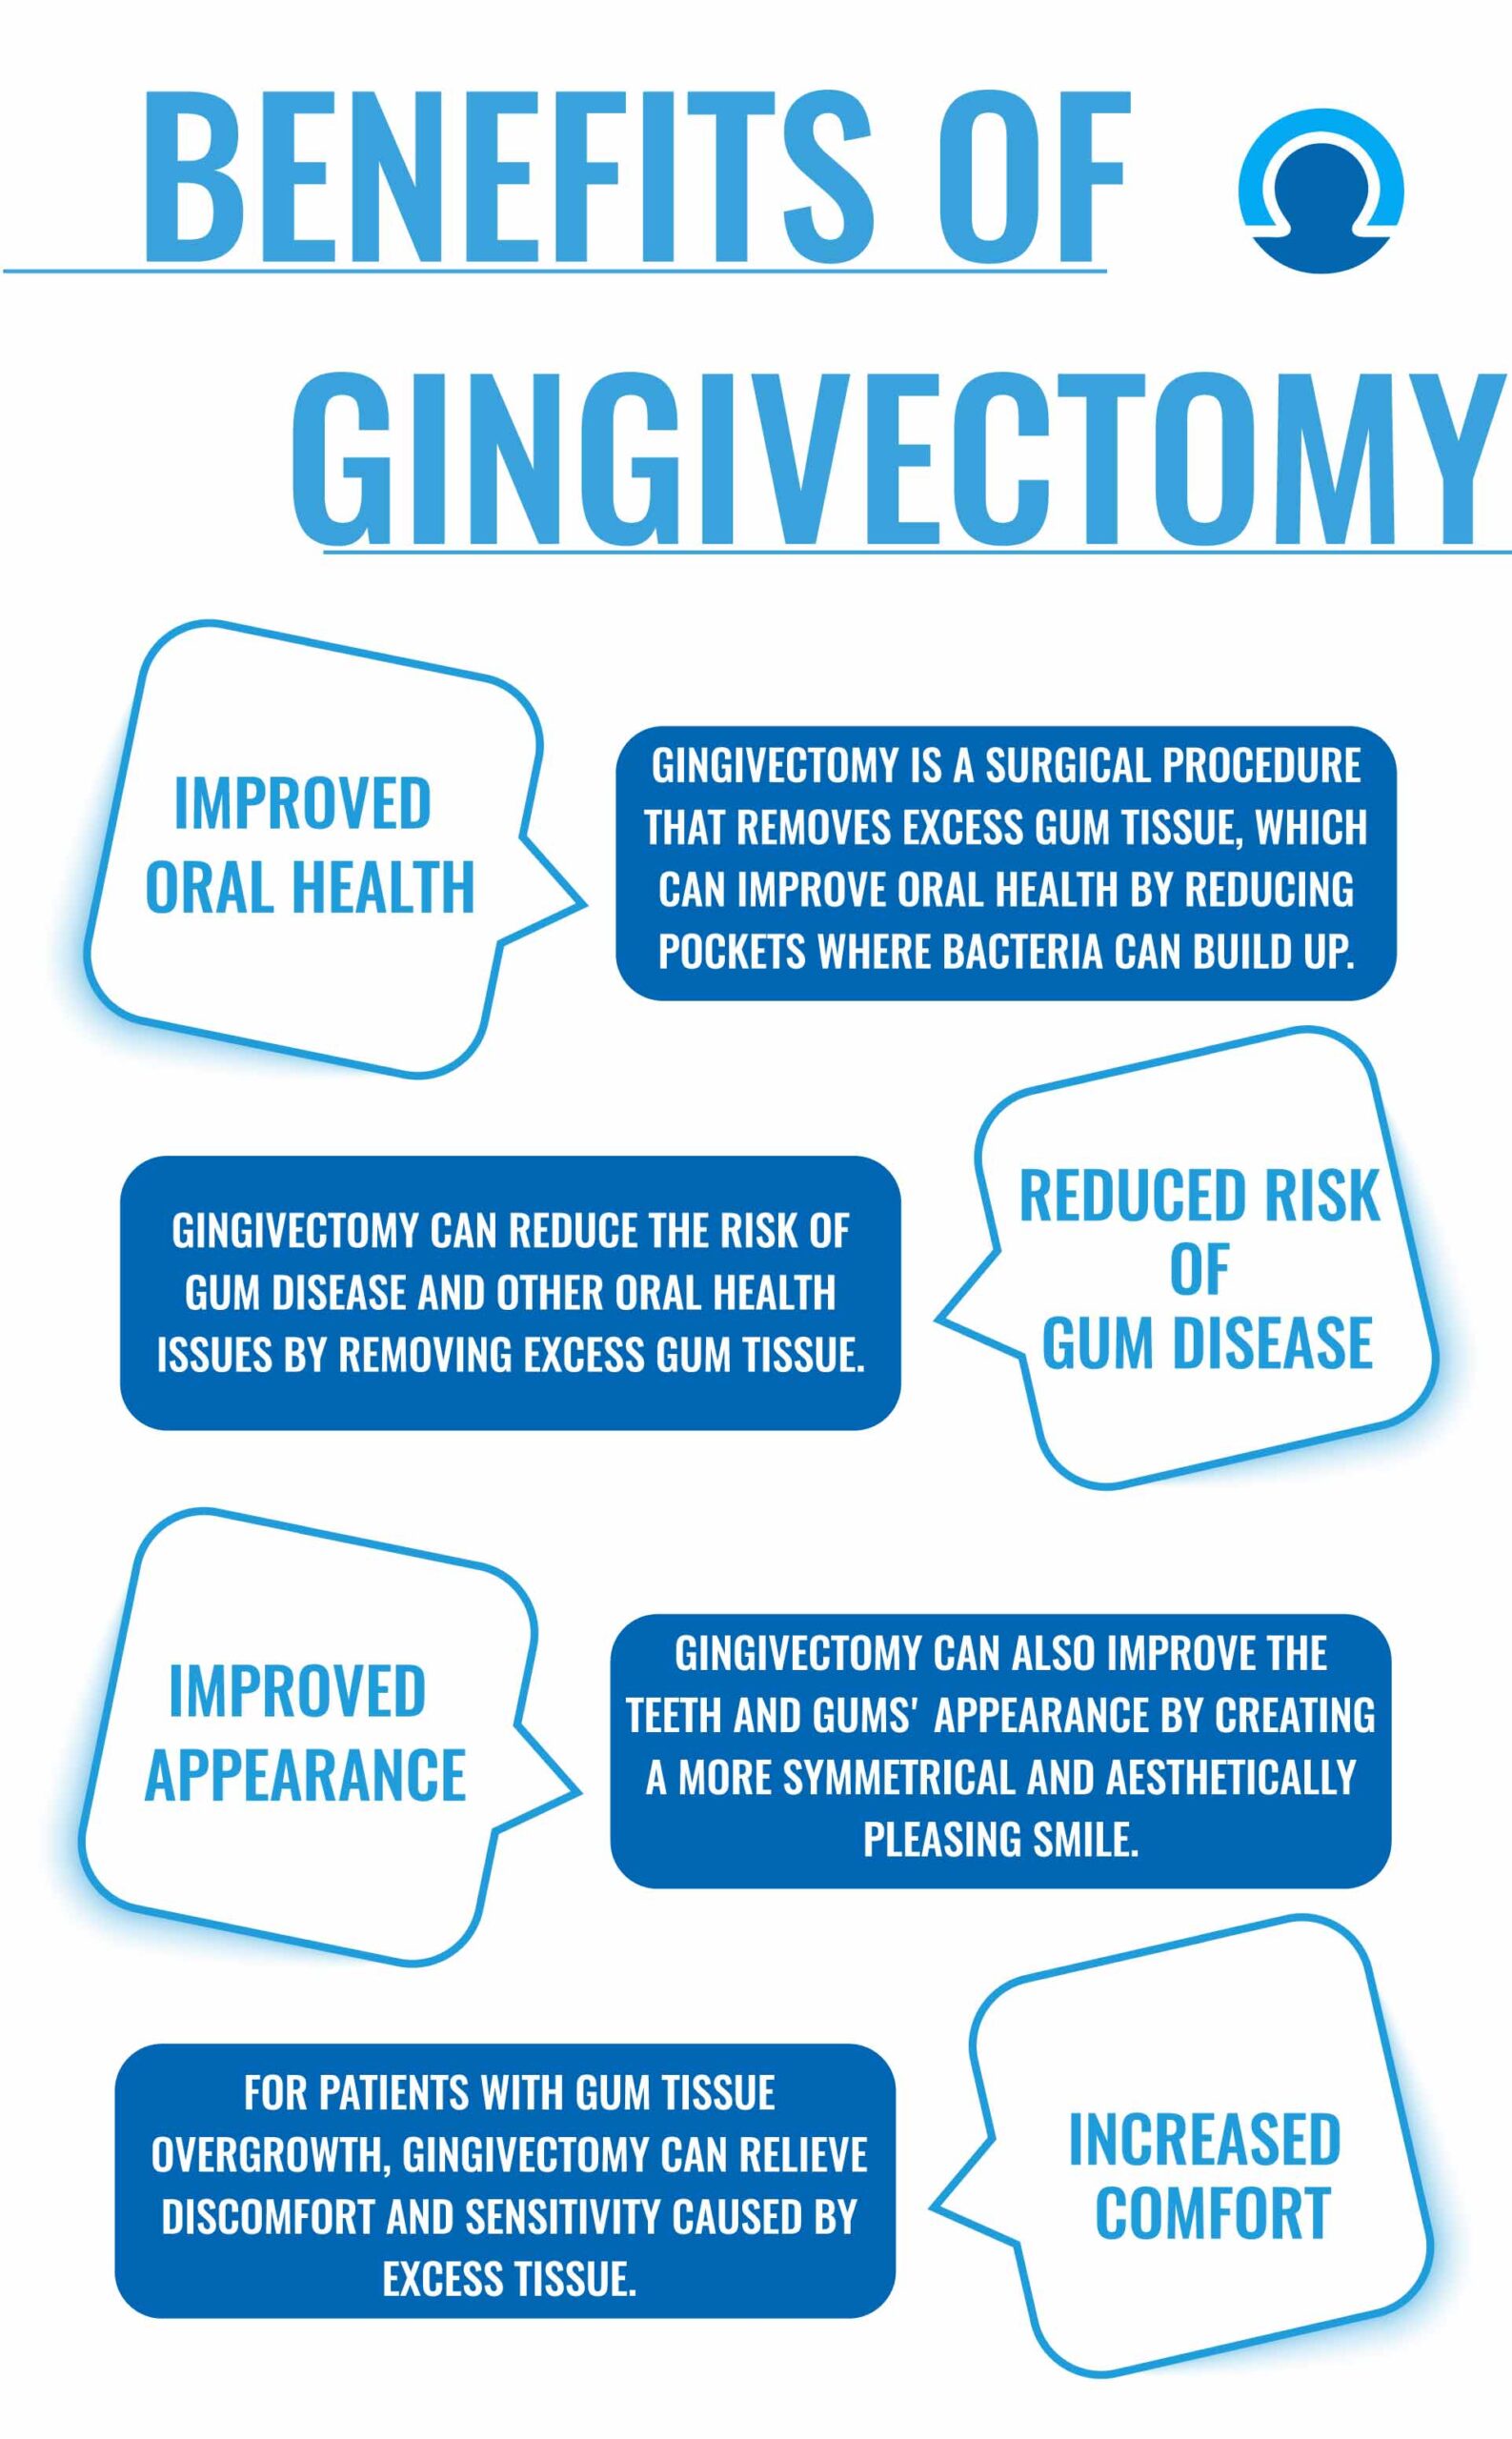 Benefits of Gingivectomy